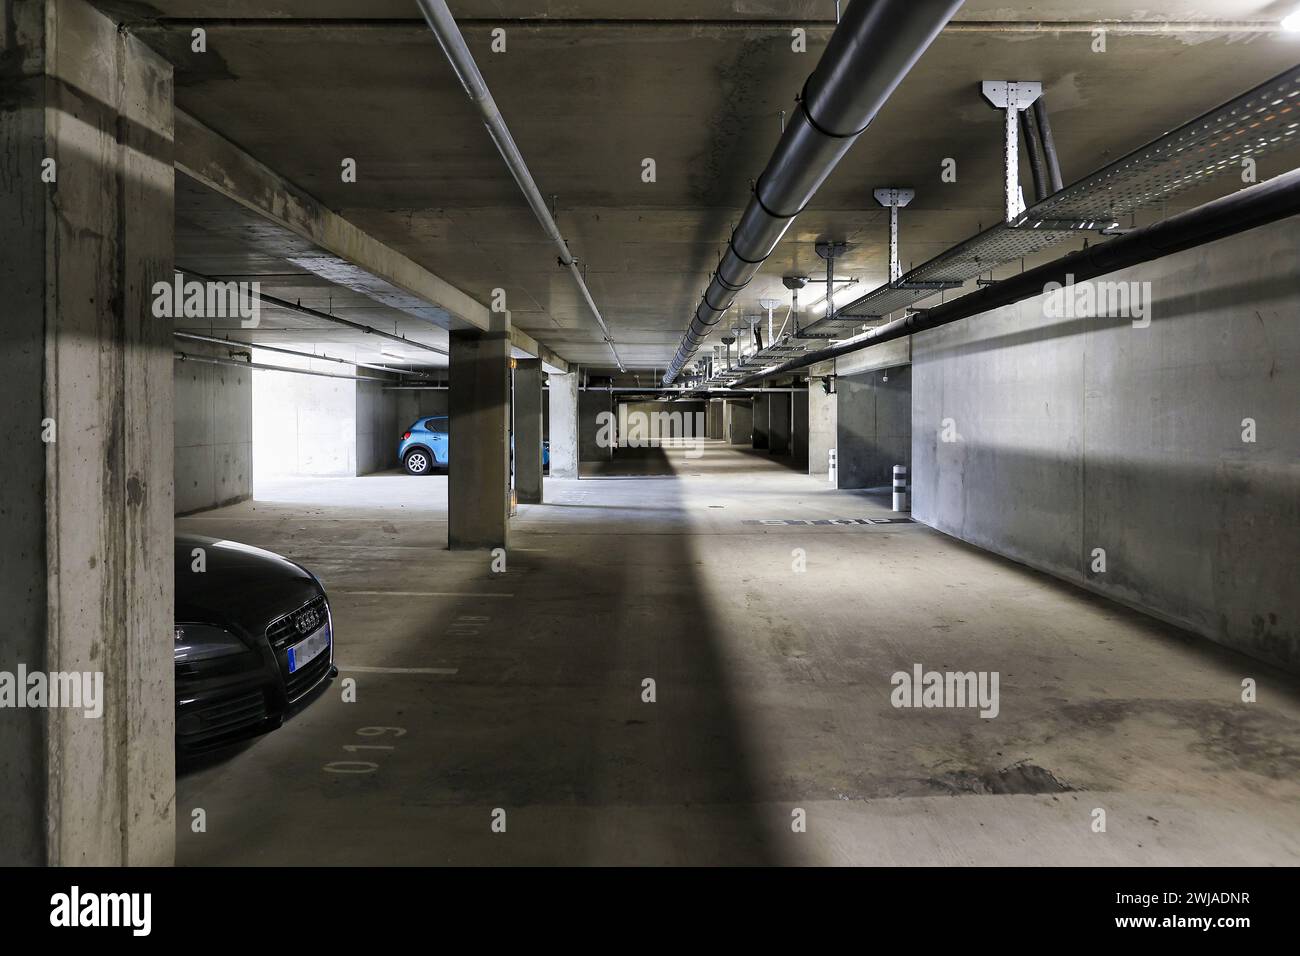 Bordeaux (south-western France): inventory of fixtures before the estate agent hands over the keys to a tenant or owner. Underground parking lot nearl Stock Photo